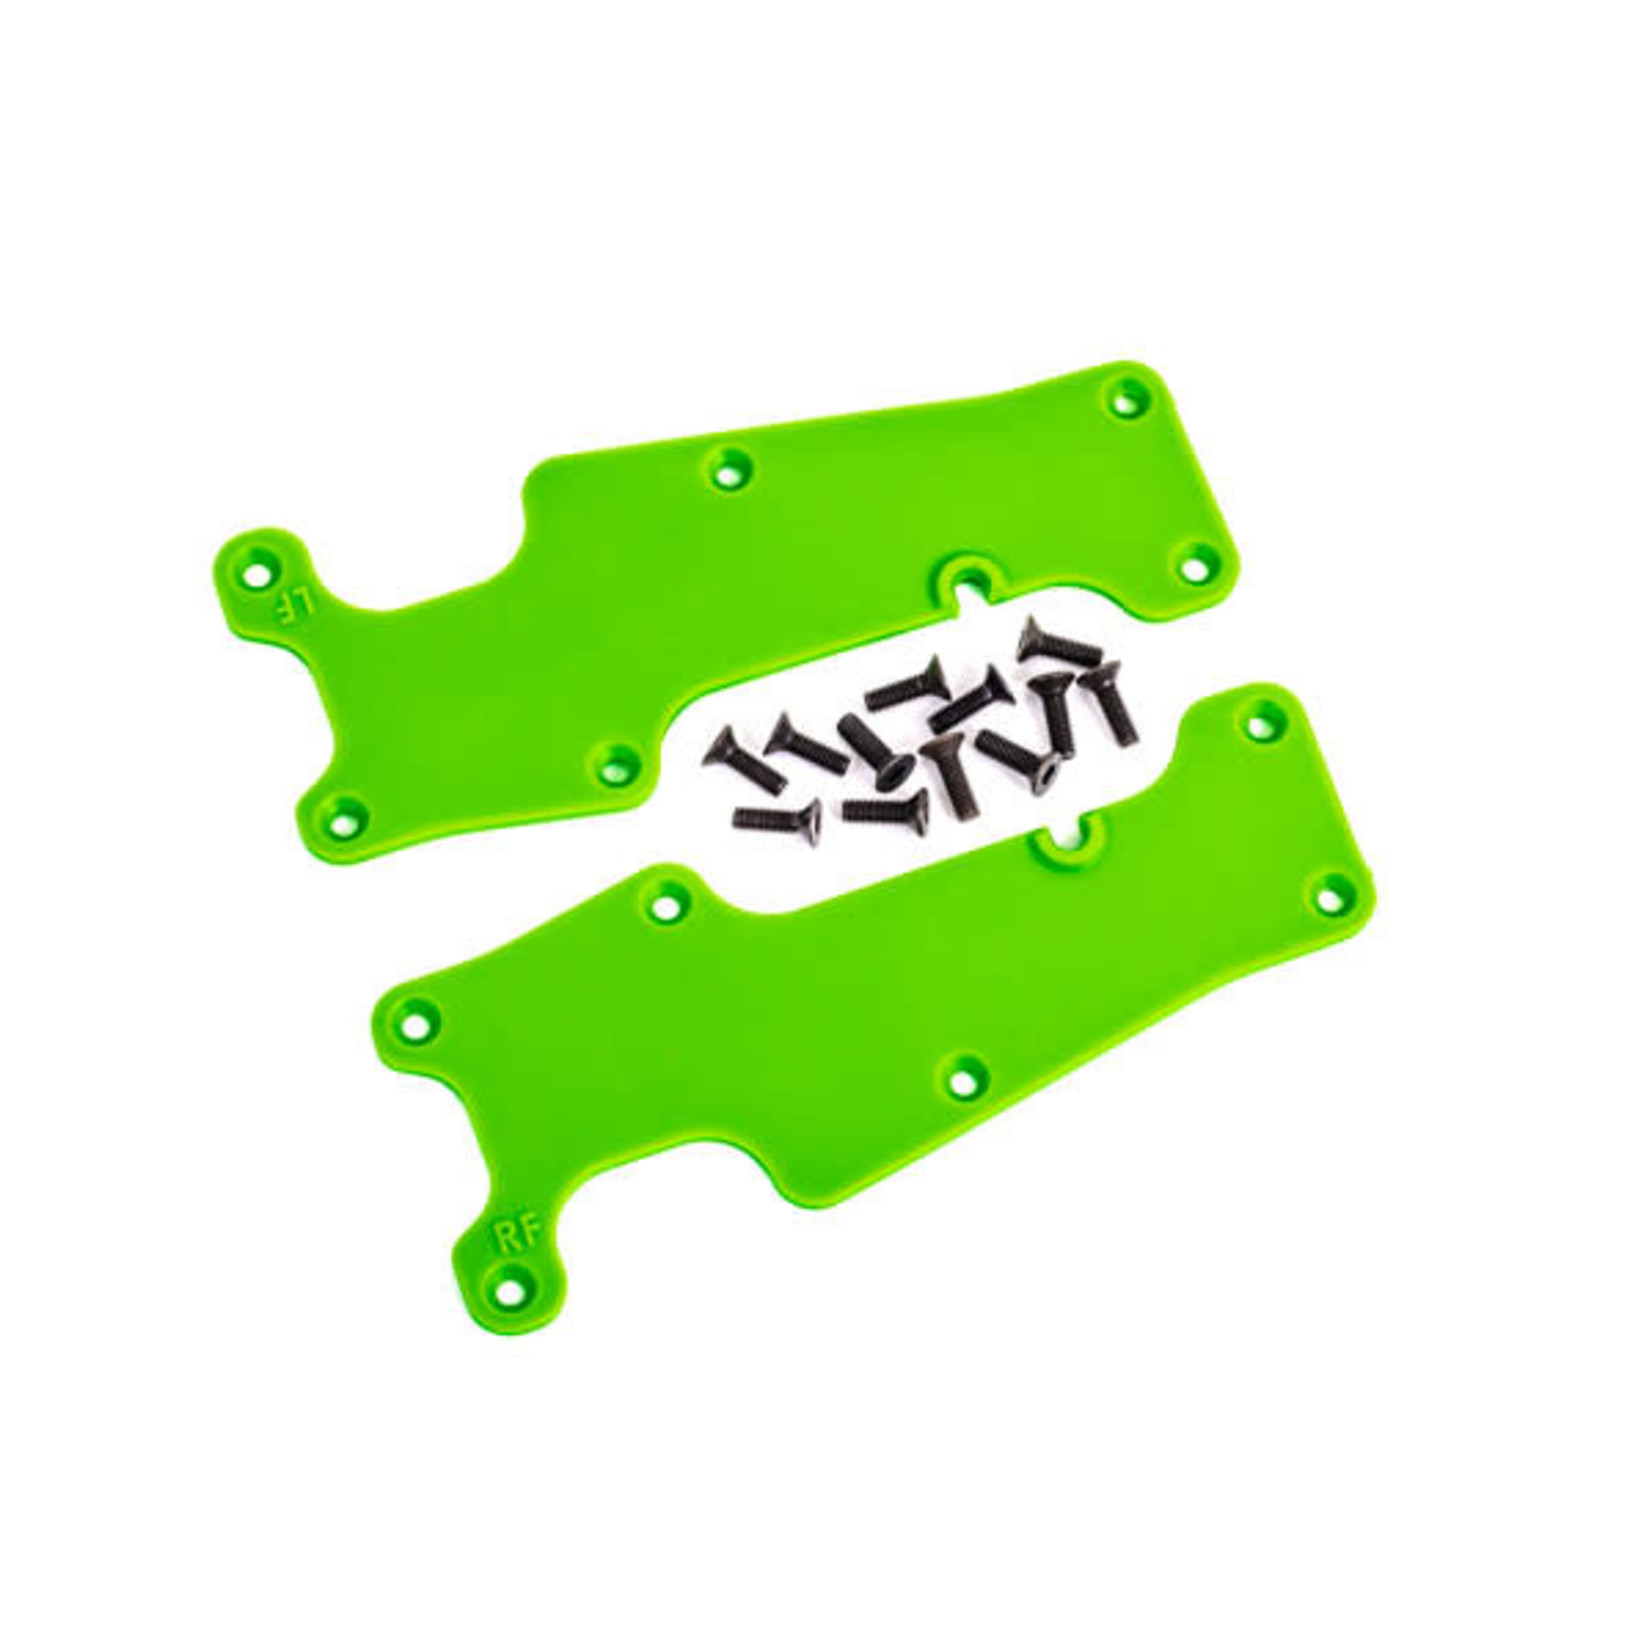 Traxxas Traxxas Sledge Front Suspension Arm Covers (Green) (2) #9633G